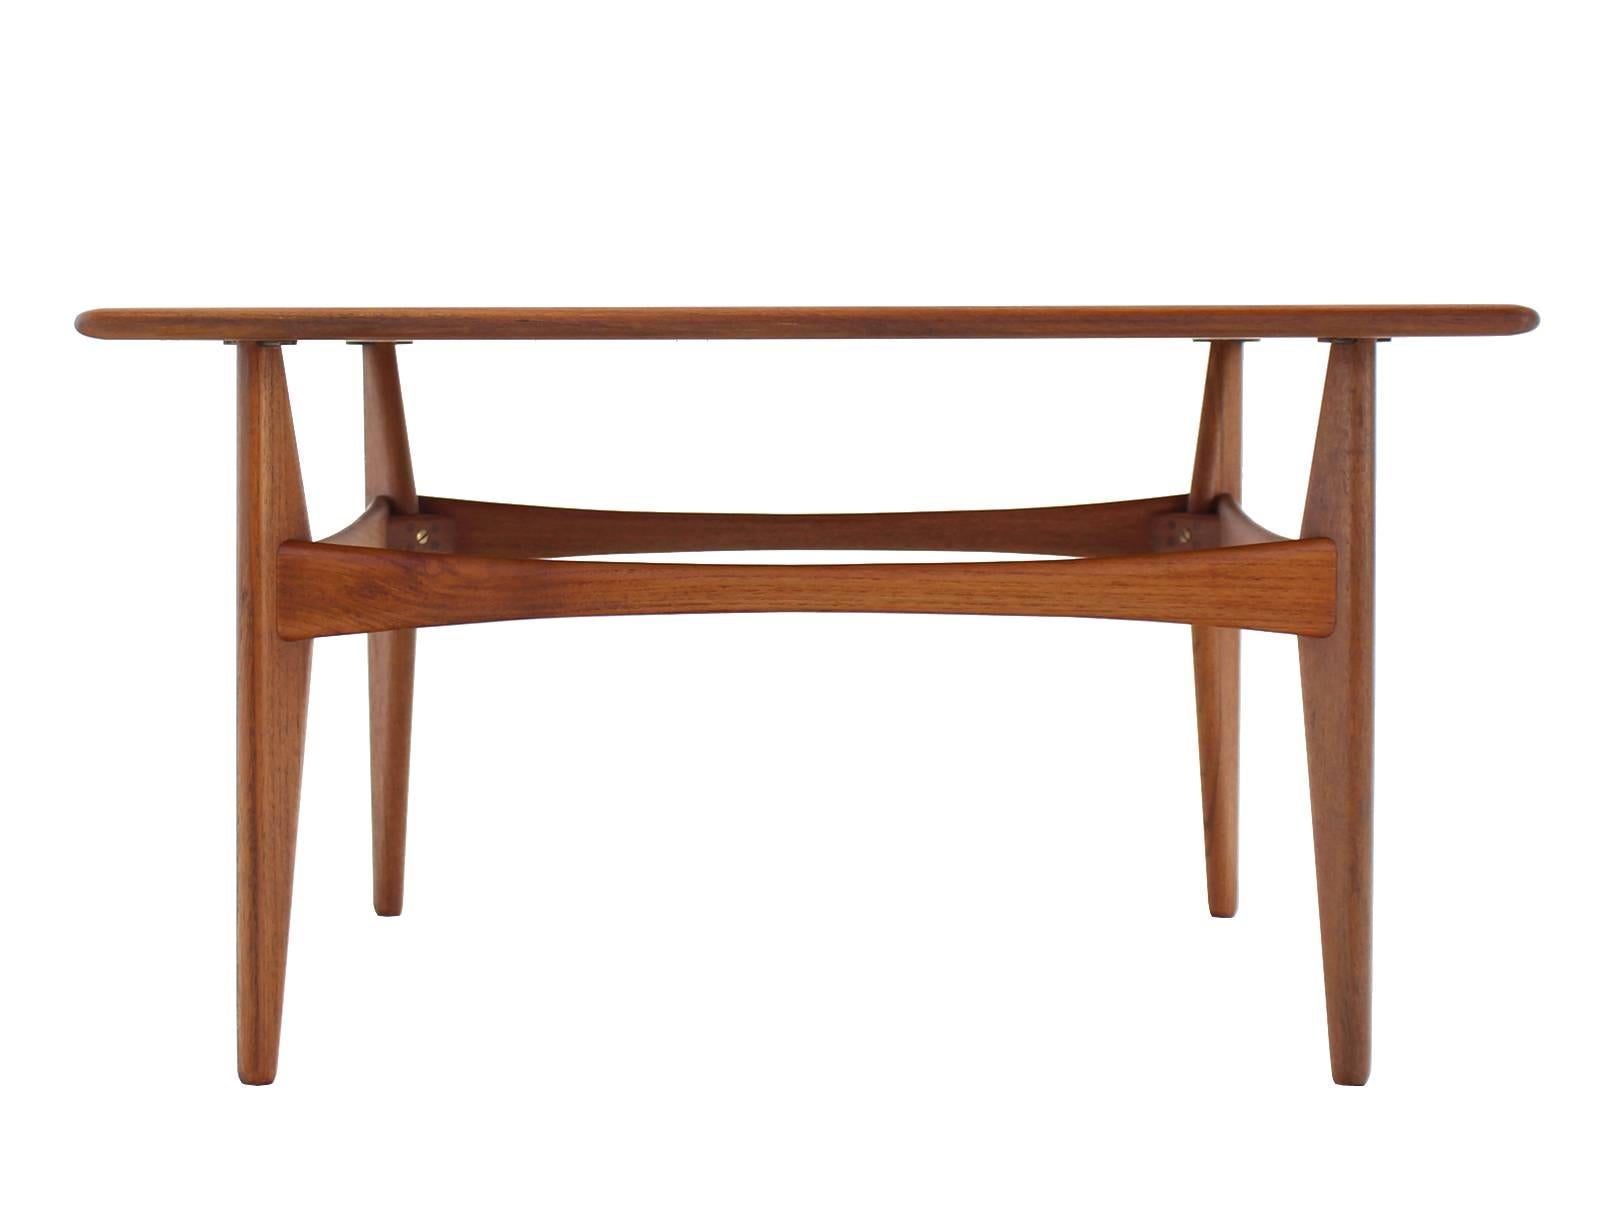 Danish Mid-Century Modern Teak Square Coffee Side Table In Excellent Condition For Sale In Rockaway, NJ